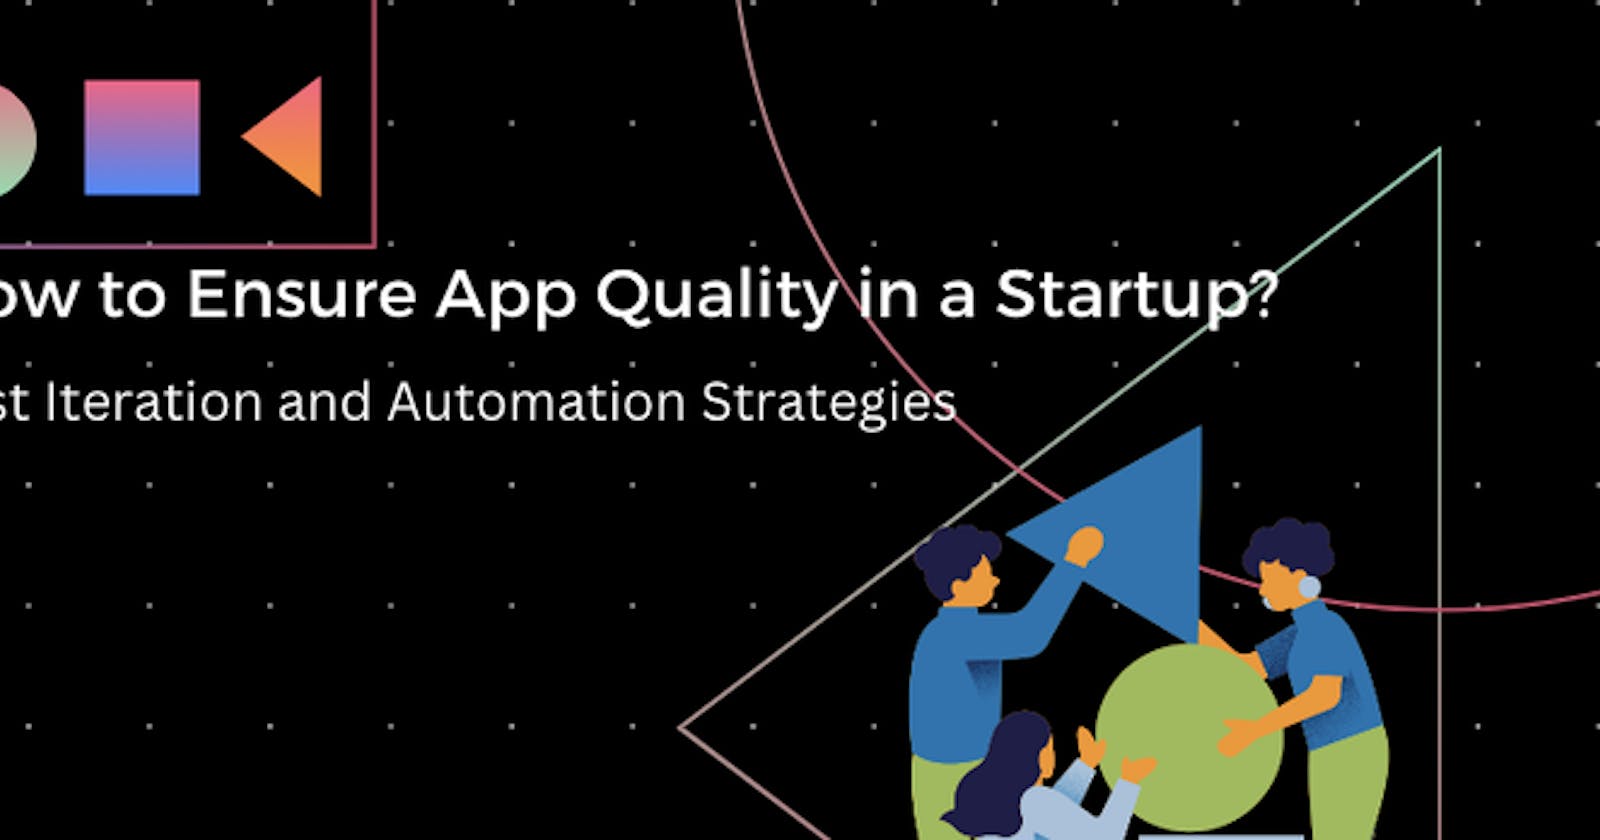 How to Ensure App Quality in a Startup: Fast Iteration and Automation Strategies